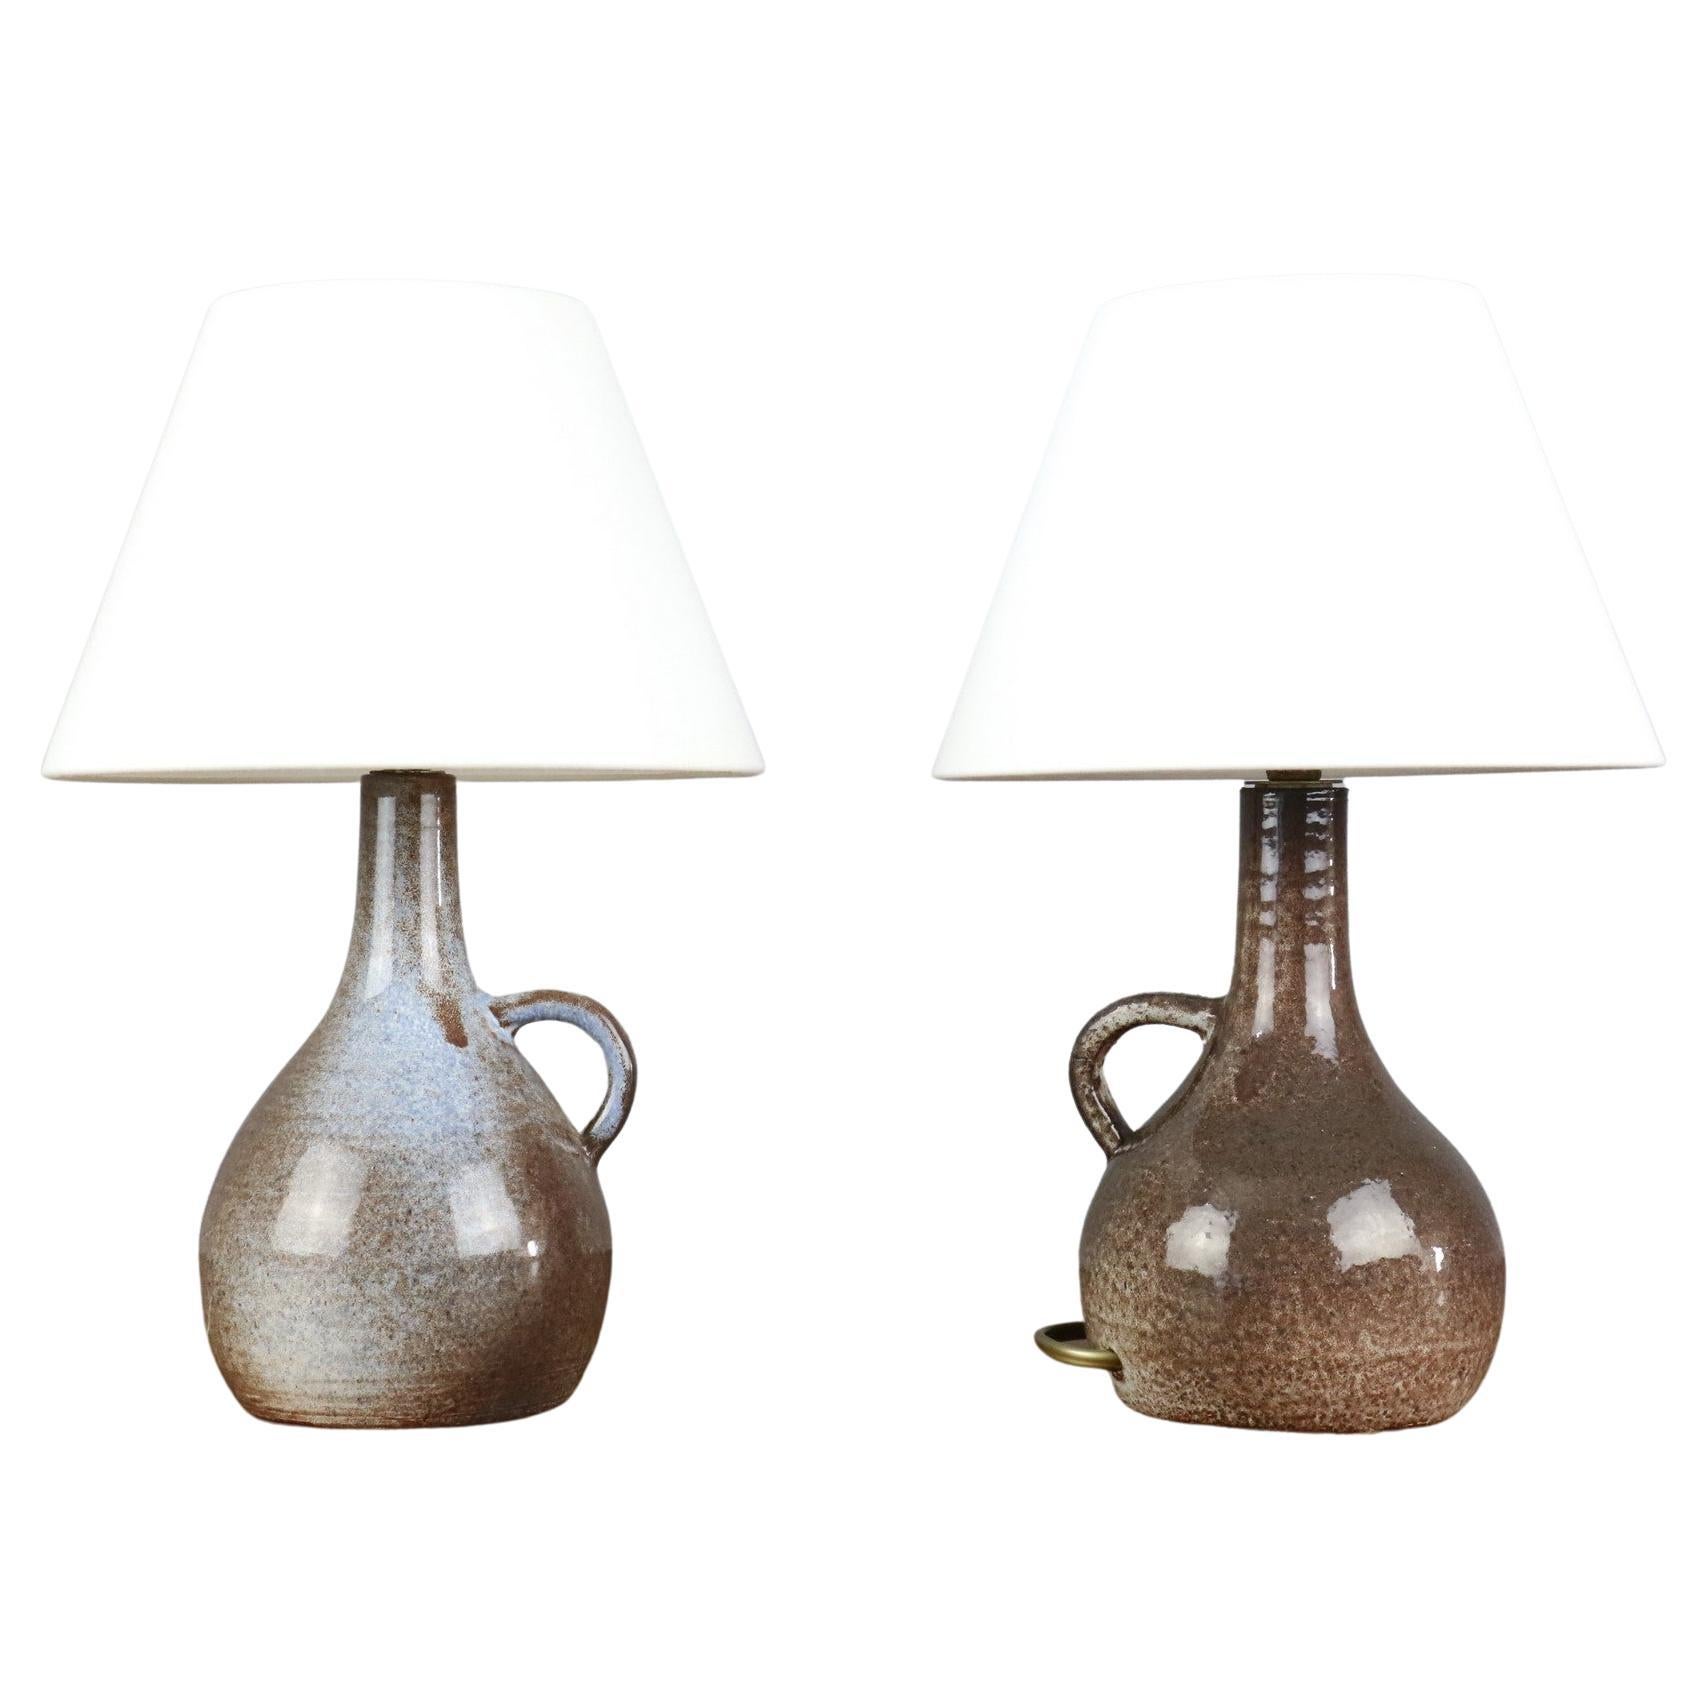 Pair of Mid-century ceramic lamps by Robert Chiazzo, 1960s